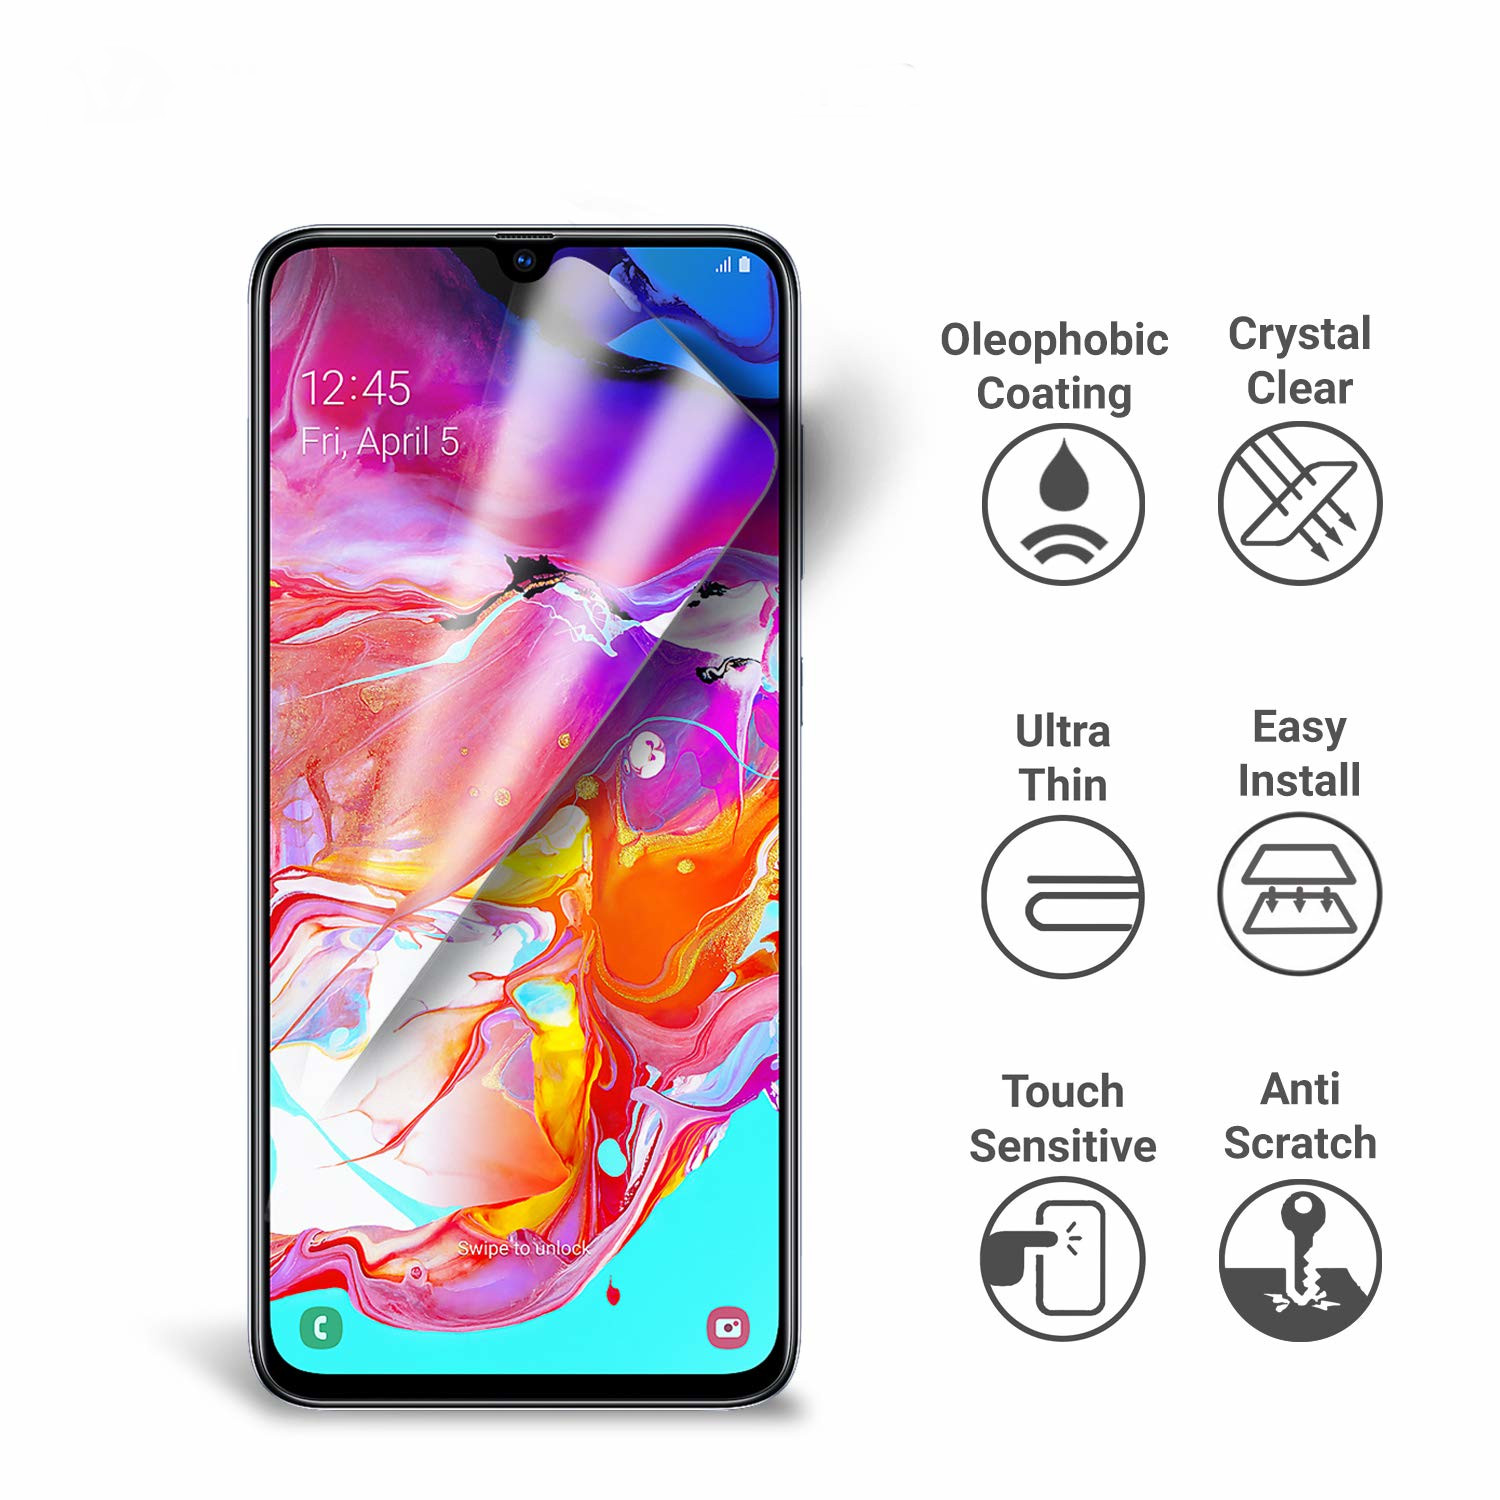 Bakeey-High-Definition-Anti-scratch-PET-Screen-Protector-for-Samsung-Galaxy-A70-2019-1496189-3